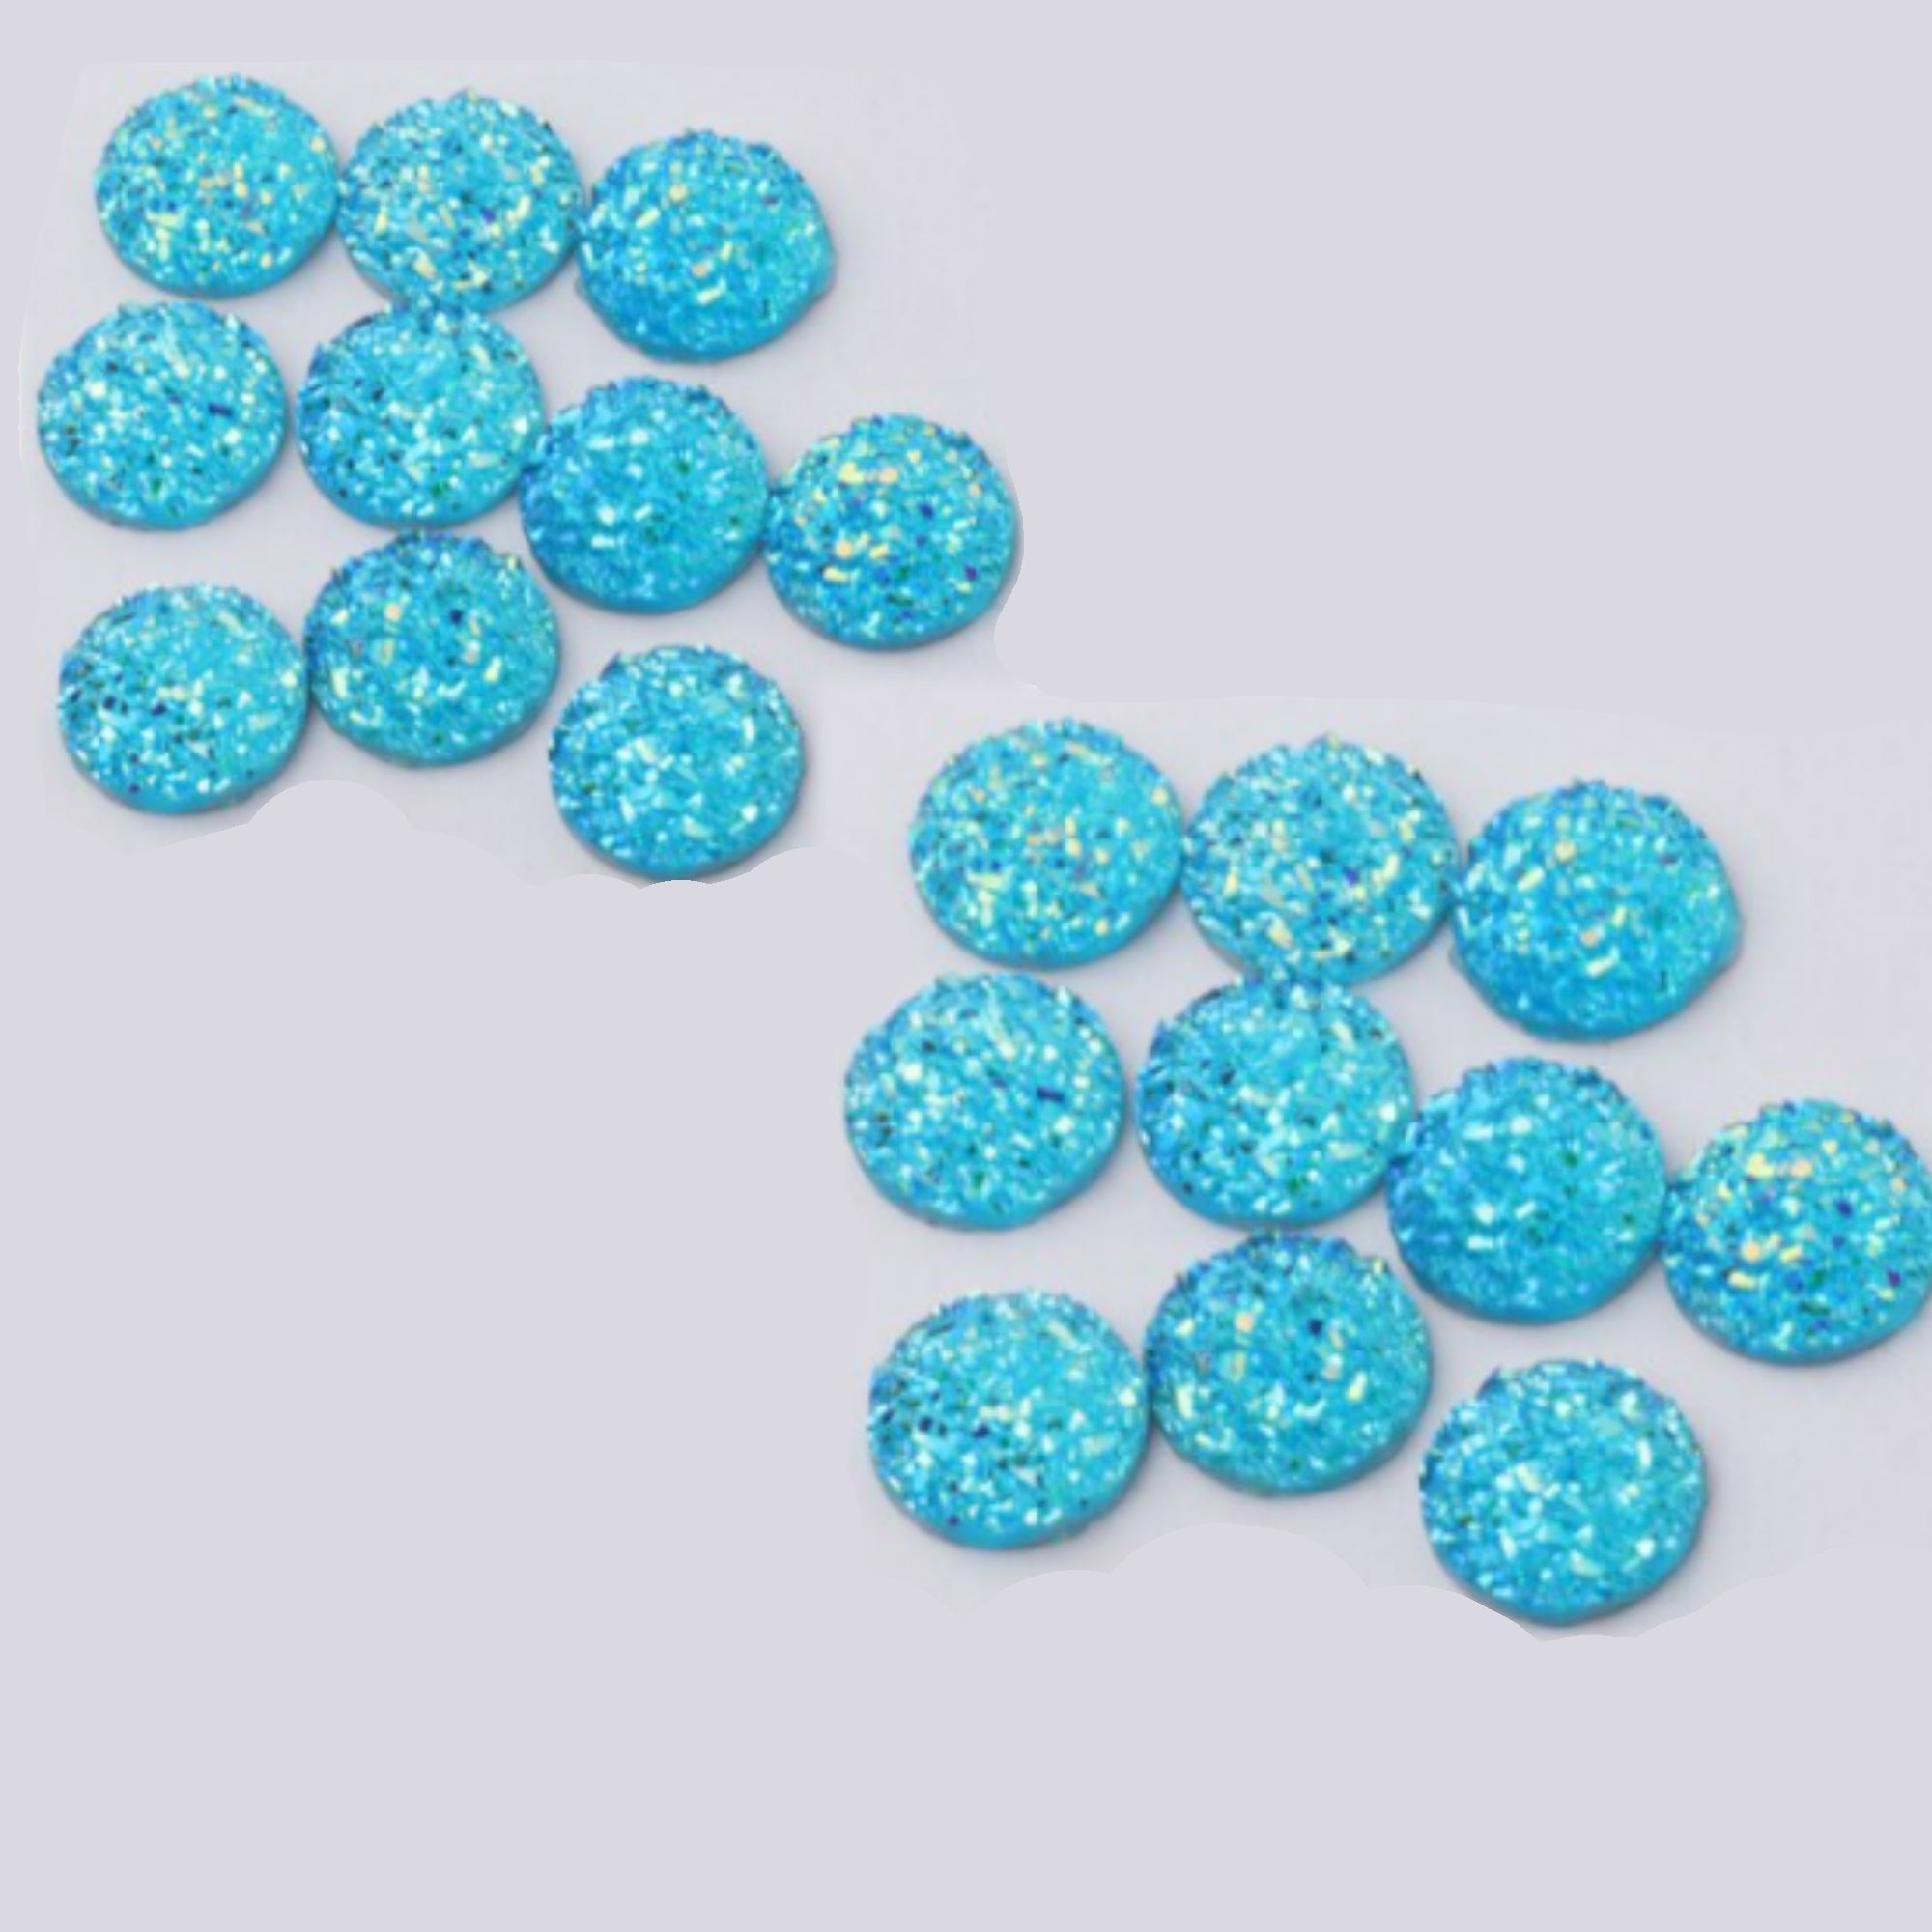 Bling It Up Collection 3/8" Aqua Chunky Round Bling - Pkg. of 20